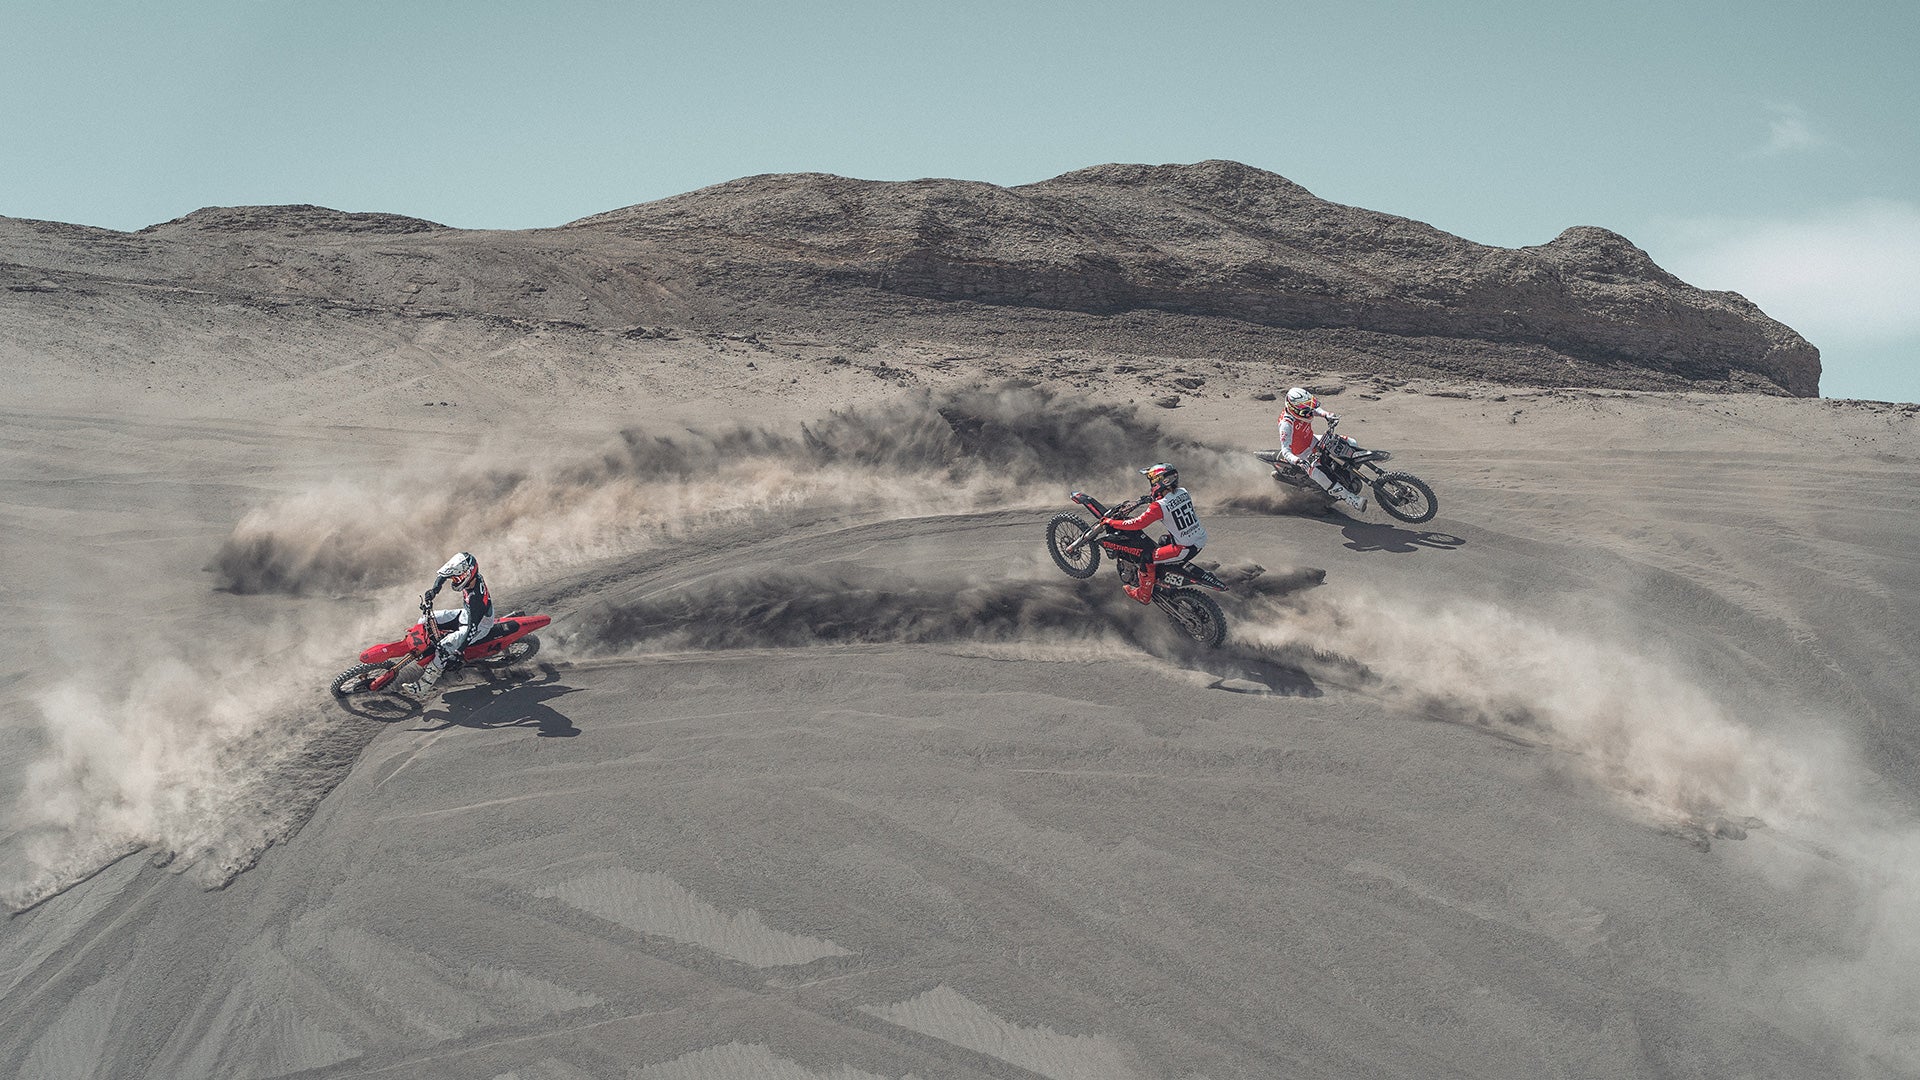 The Freeride season is upon us. Hills, Desert or Dunes we’ve got you covered.